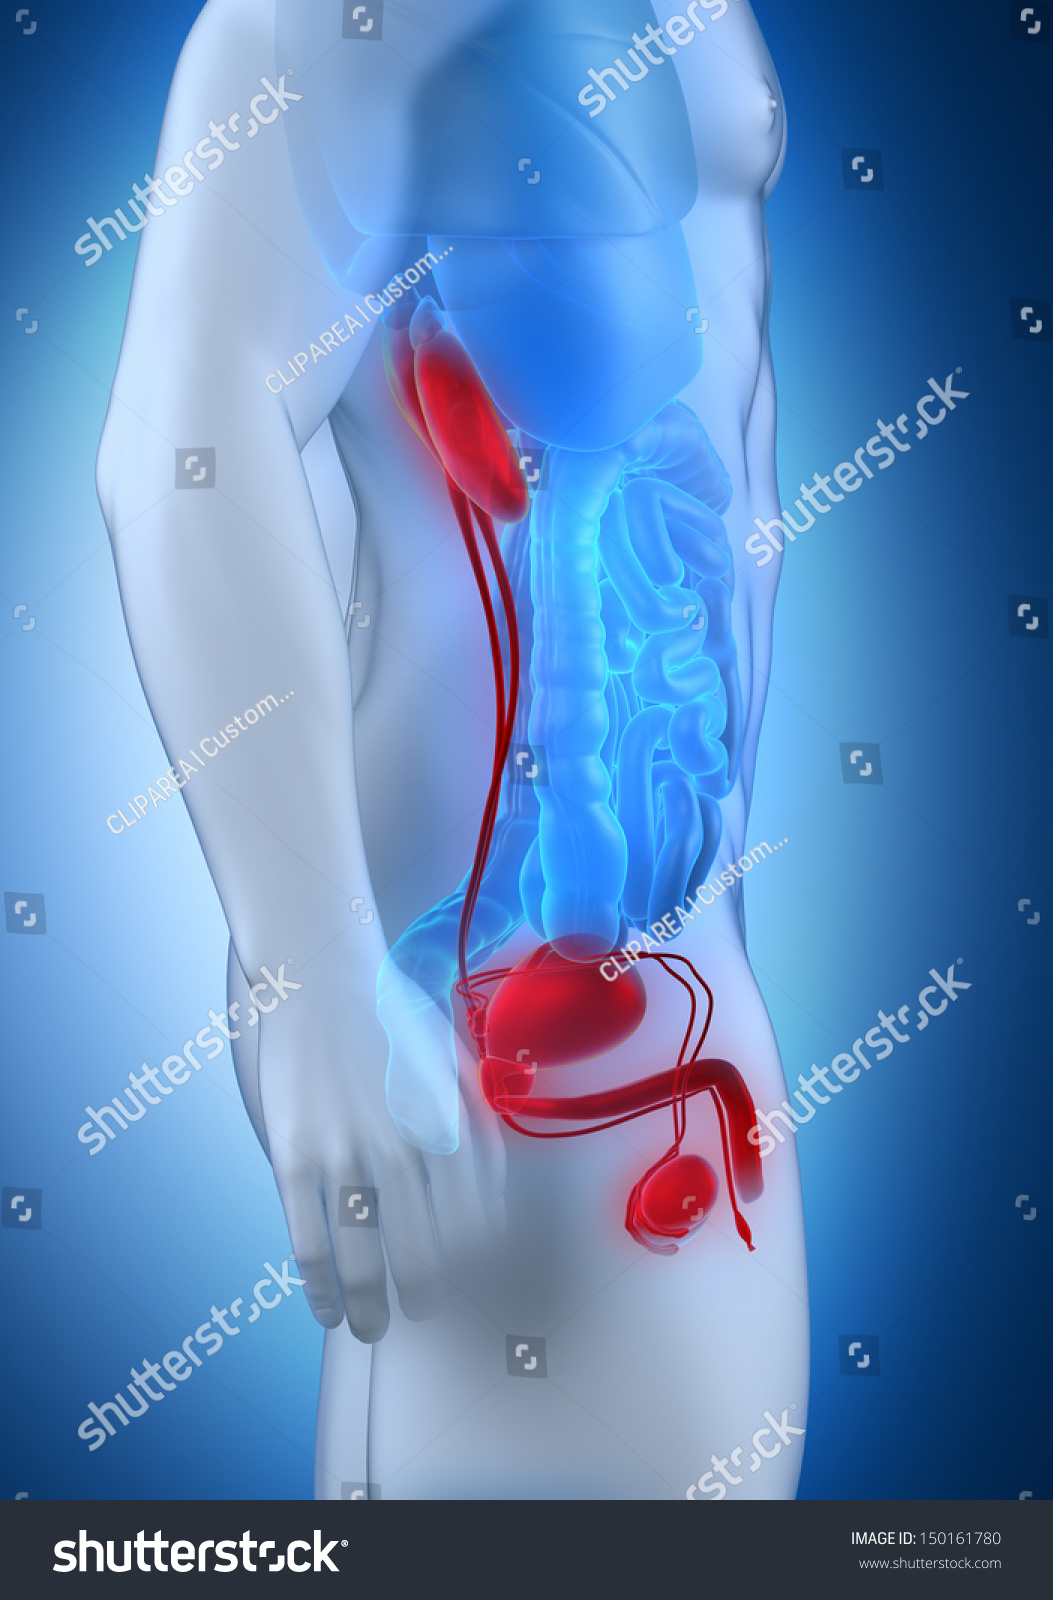 Male Anatomy Lateral View Stock Photo 150161780 : Shutterstock